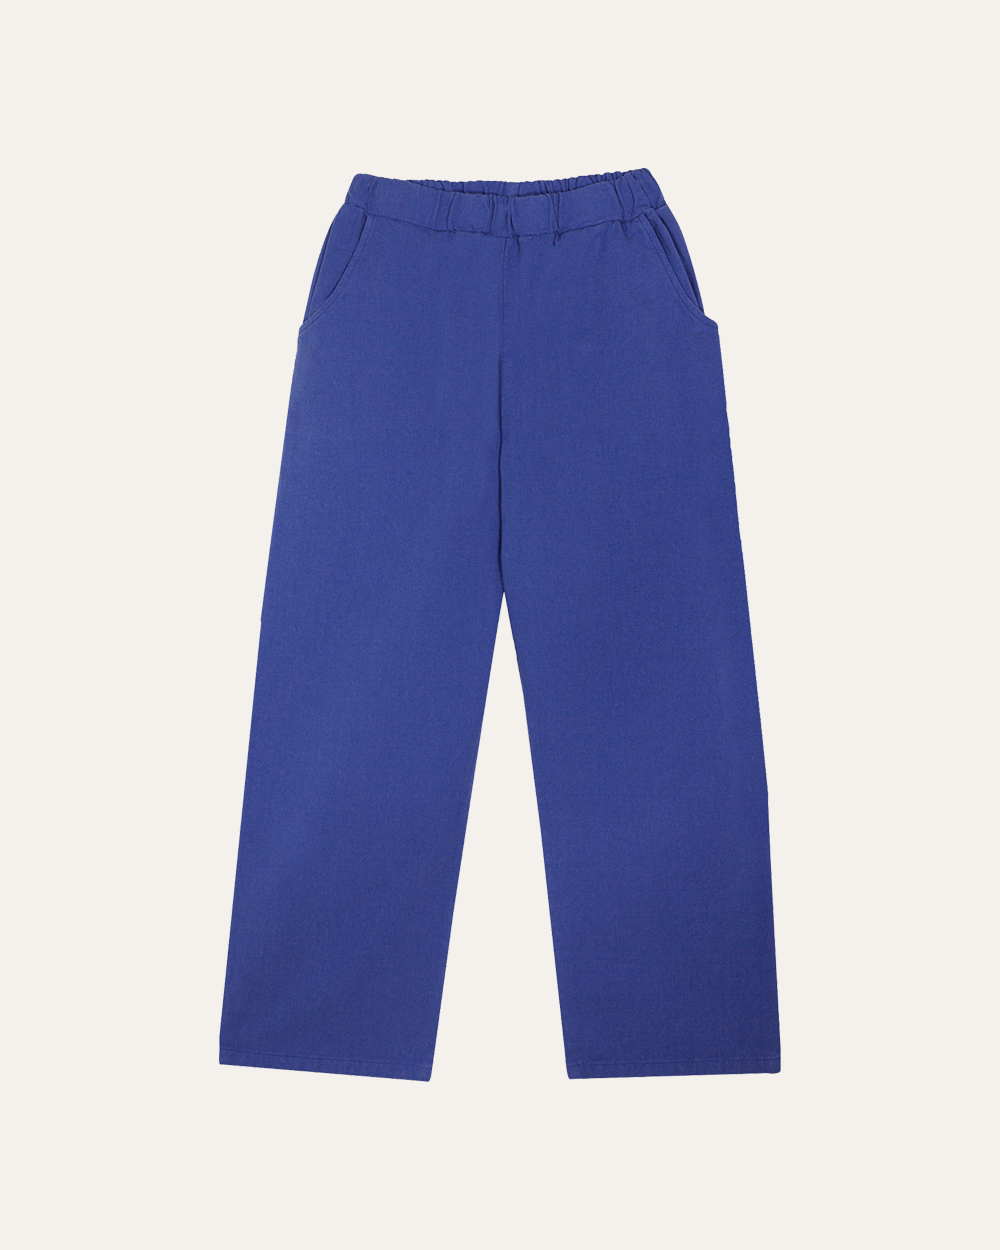 [ THE CAMPAMENTO ] BLUE WASHED TROUSERS